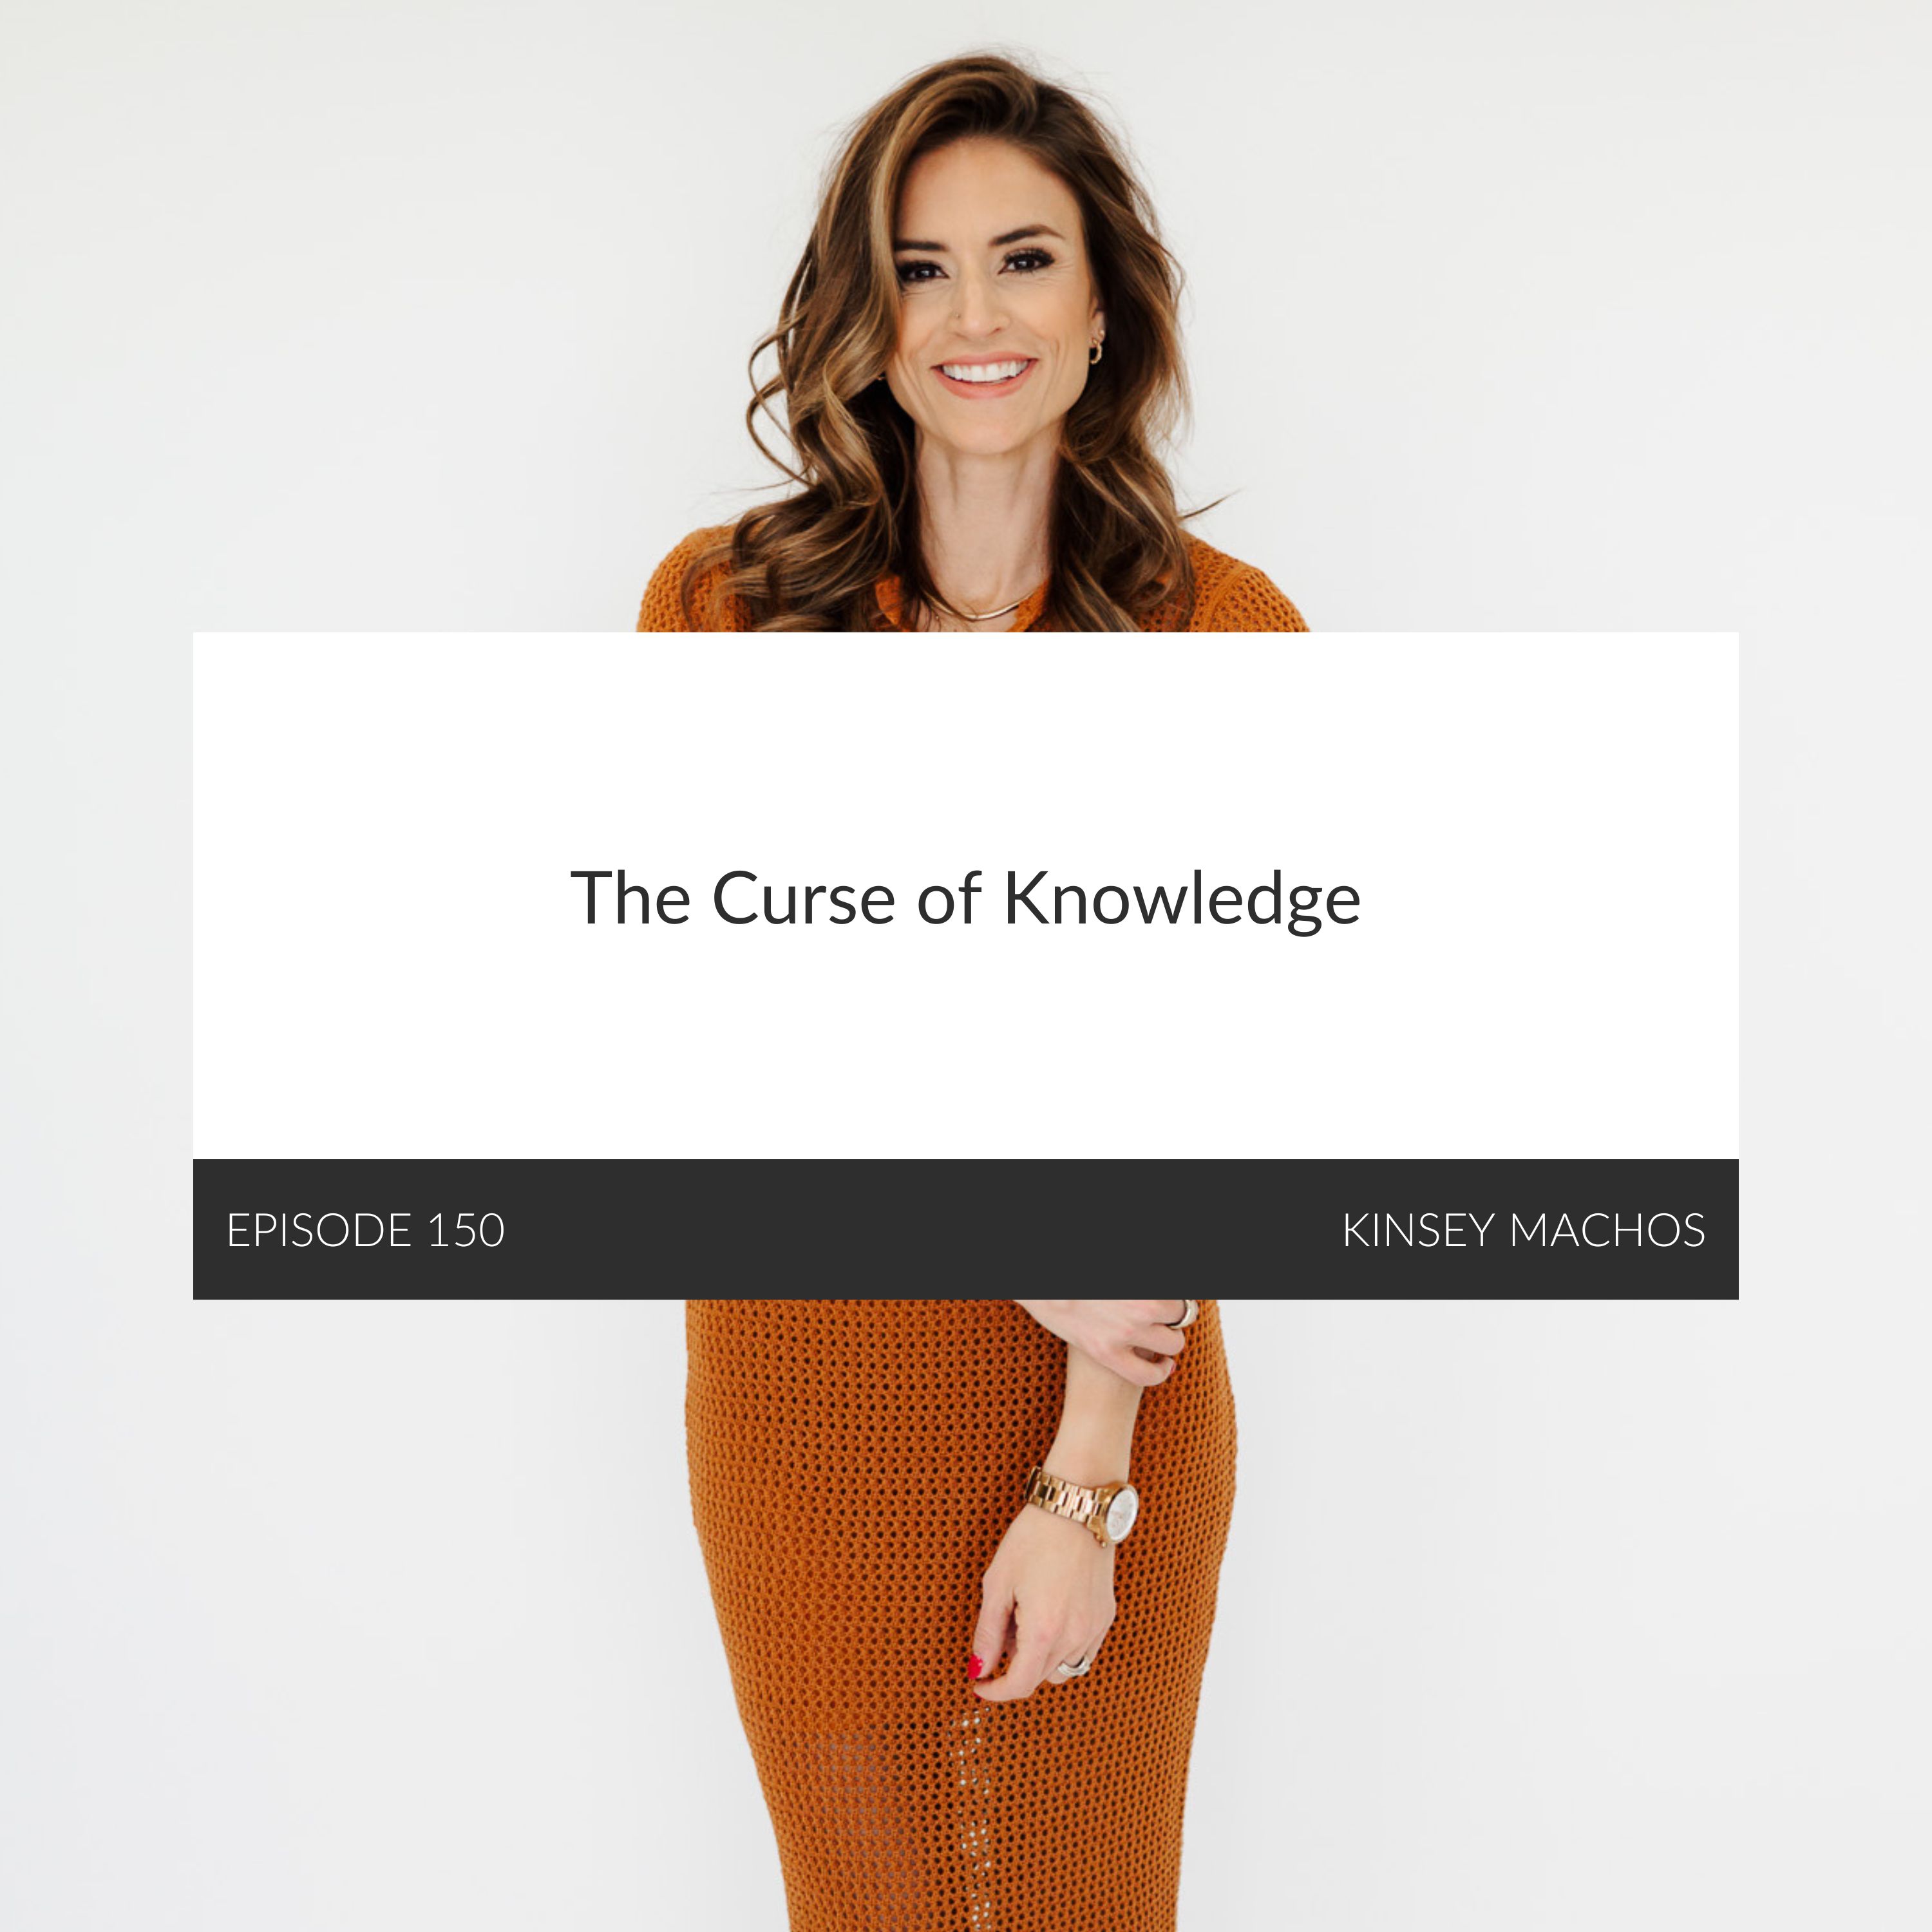 The Curse of Knowledge